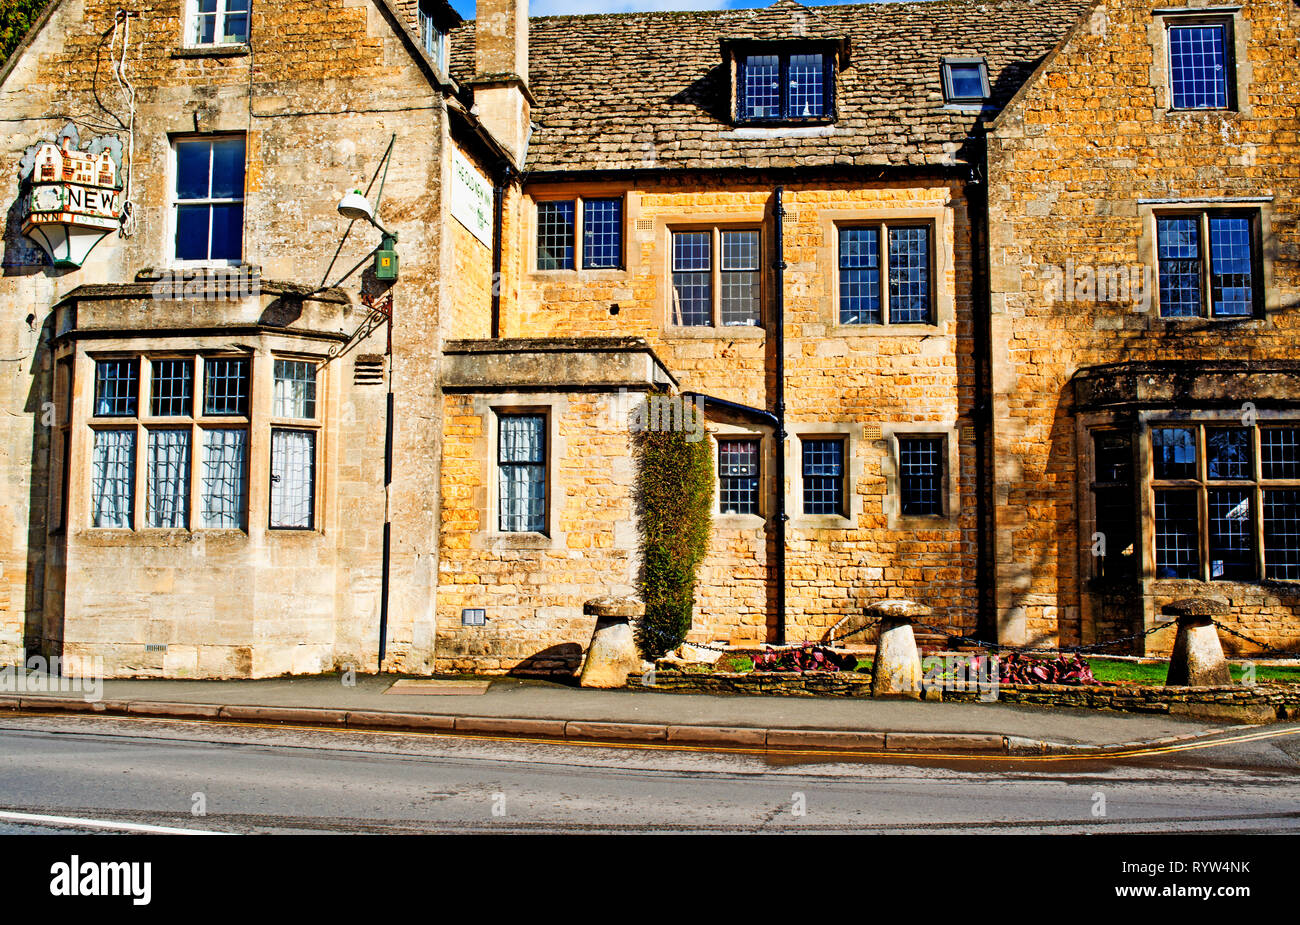 Kingham Wate, Cotswolds, RLE Nouveau Old Inn, Gloucestershire, Angleterre Banque D'Images